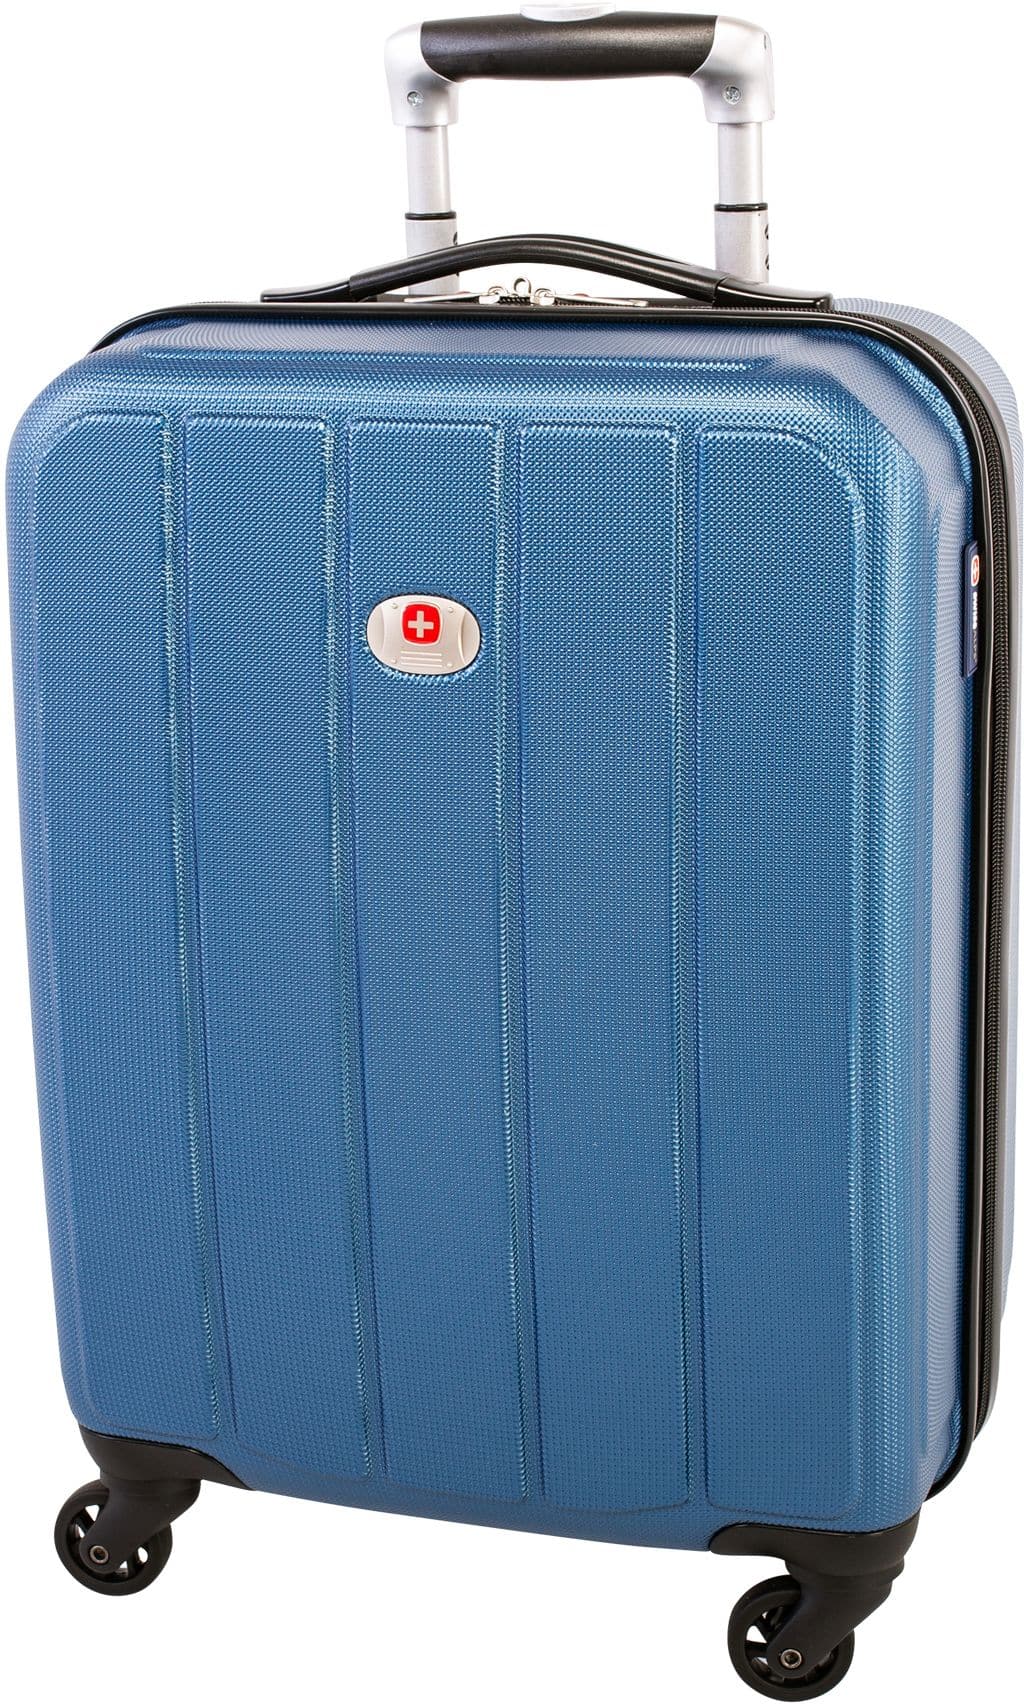 Swiss Alps Expandable Hardside Spinner Wheel Carry-On Travel